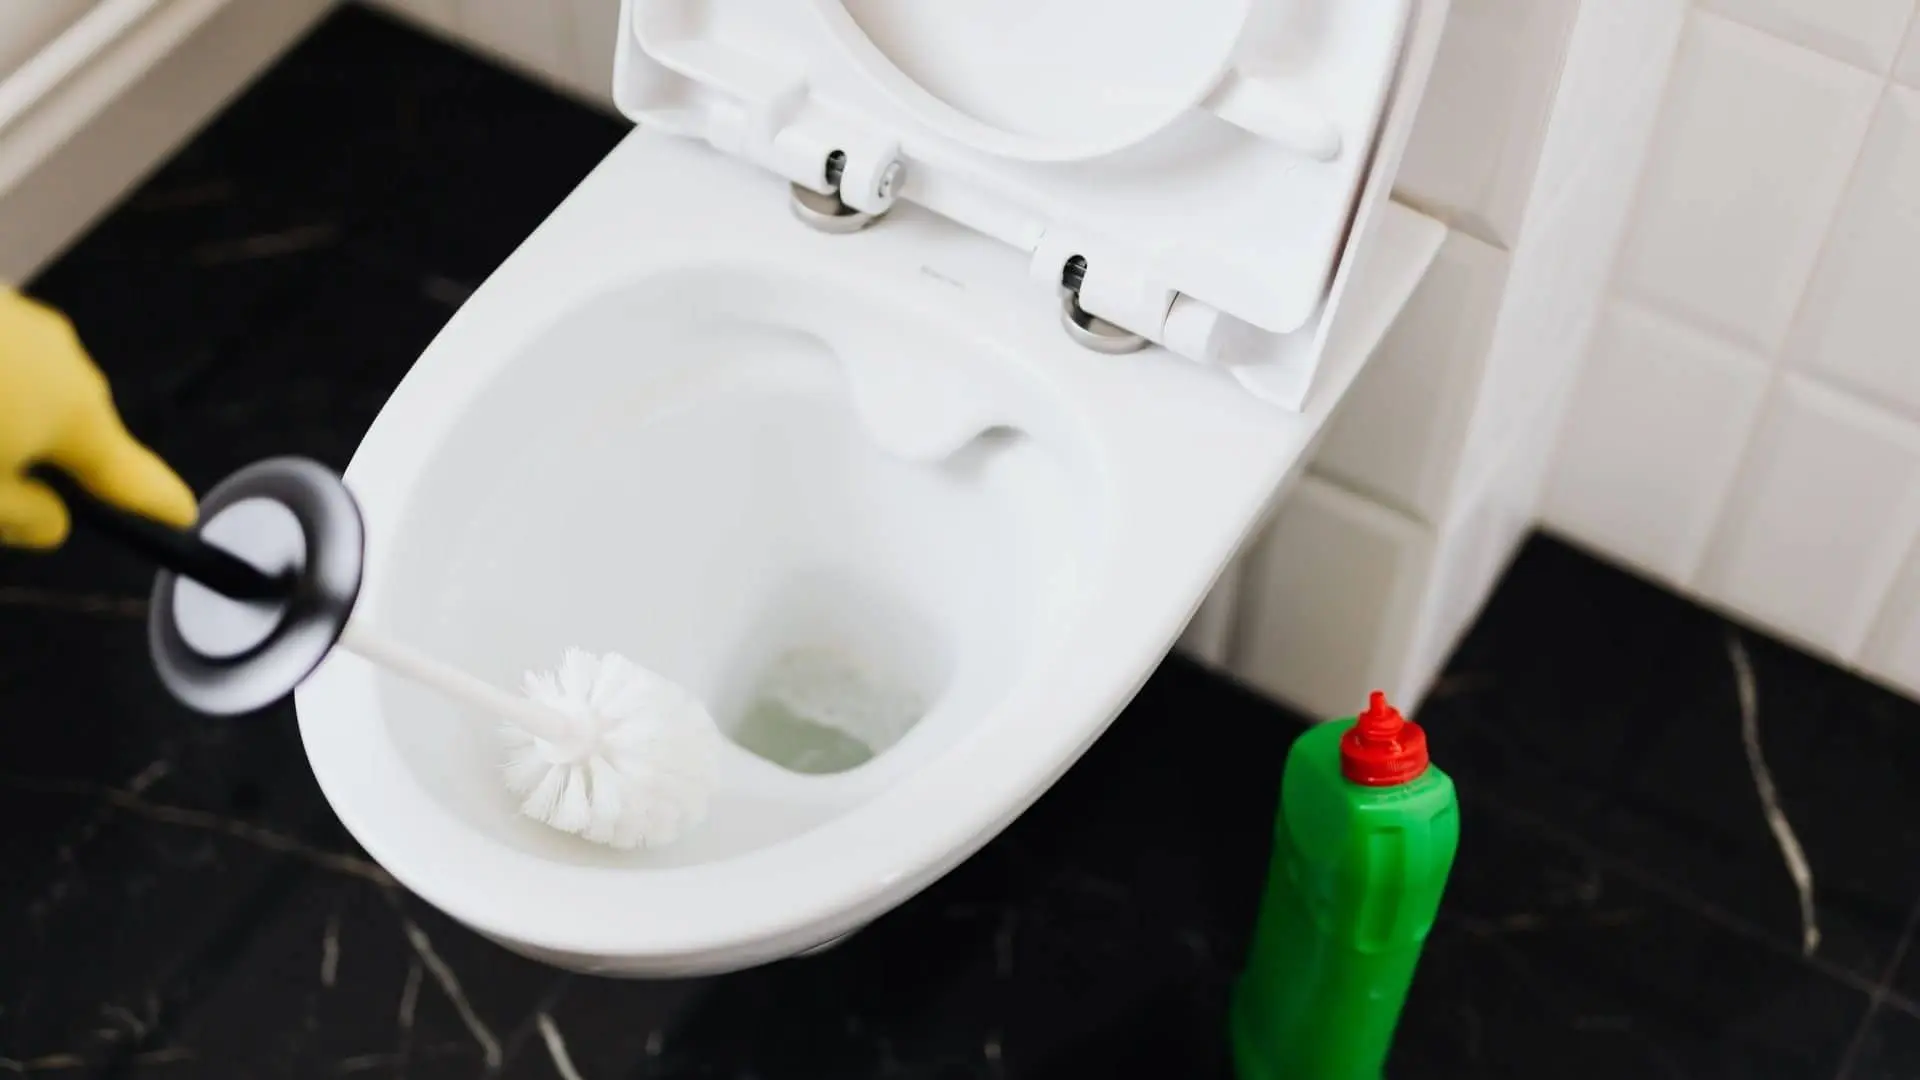 DIY Ways to Fix a Clogged Toilet - Best Plumbing